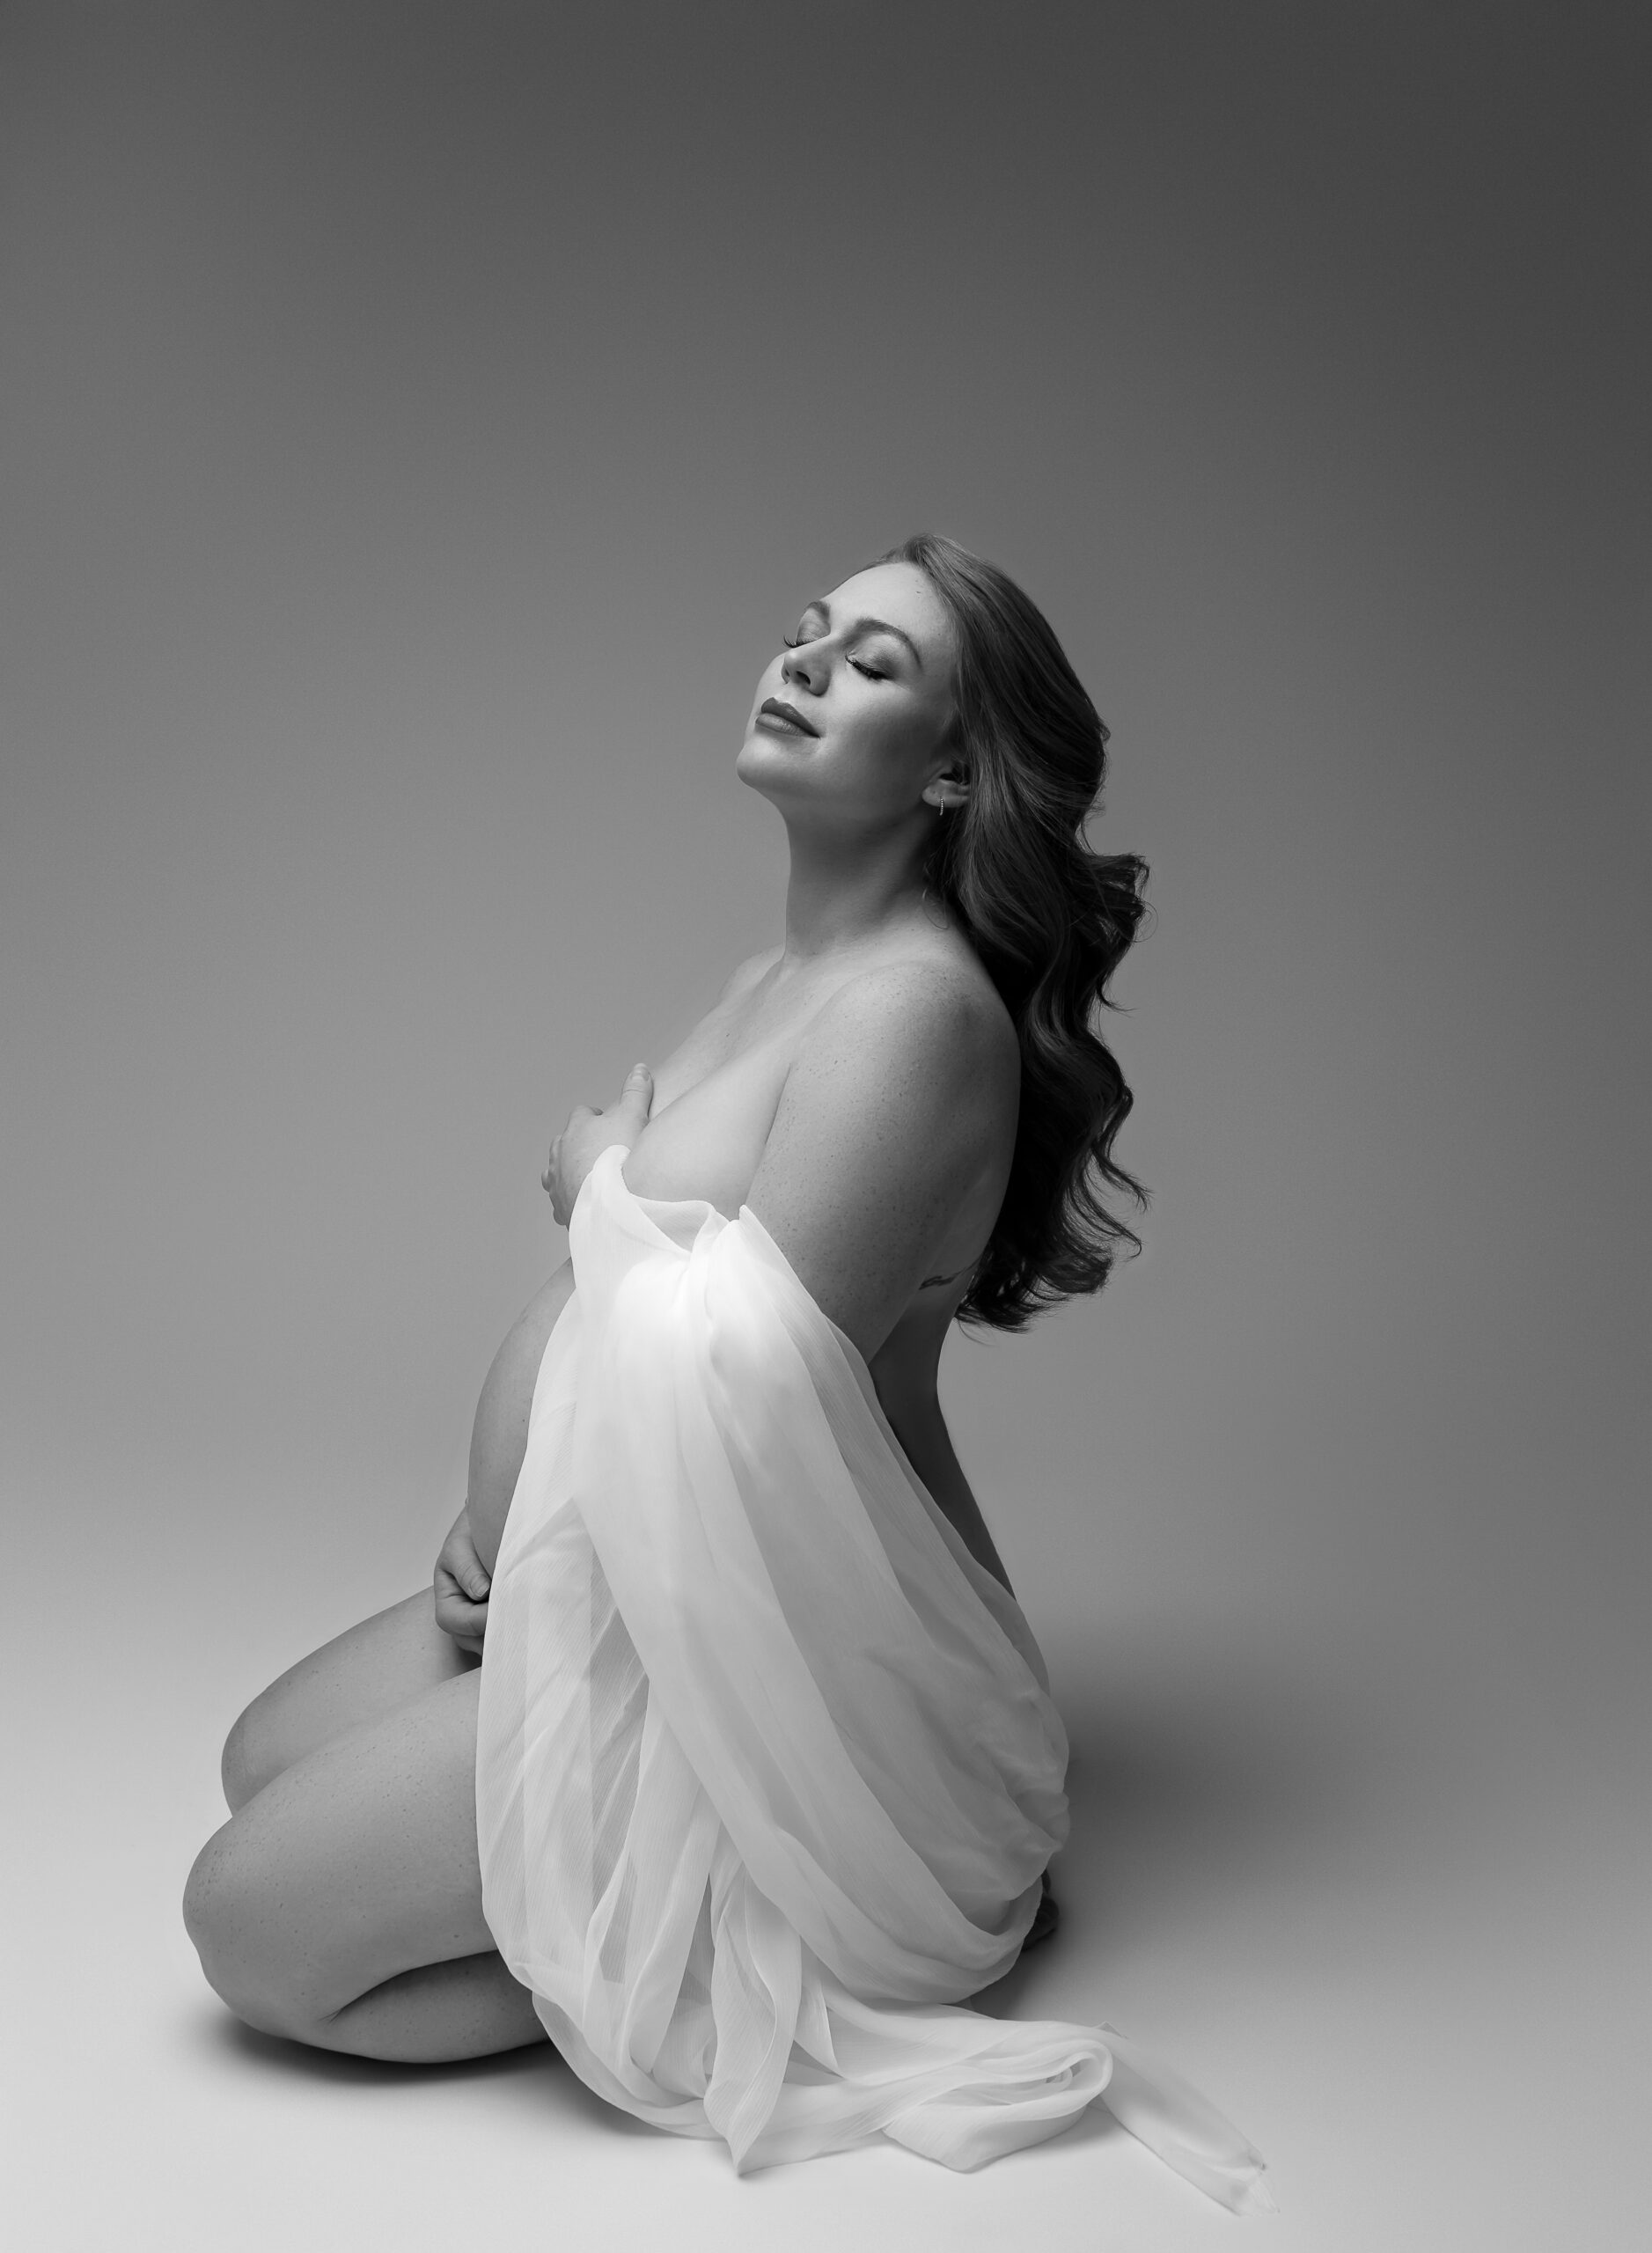 A black and white photo of a pregnant woman kneeling on the ground and looking upward. Her hair falls down her back, and she is wrapped in white fabric.